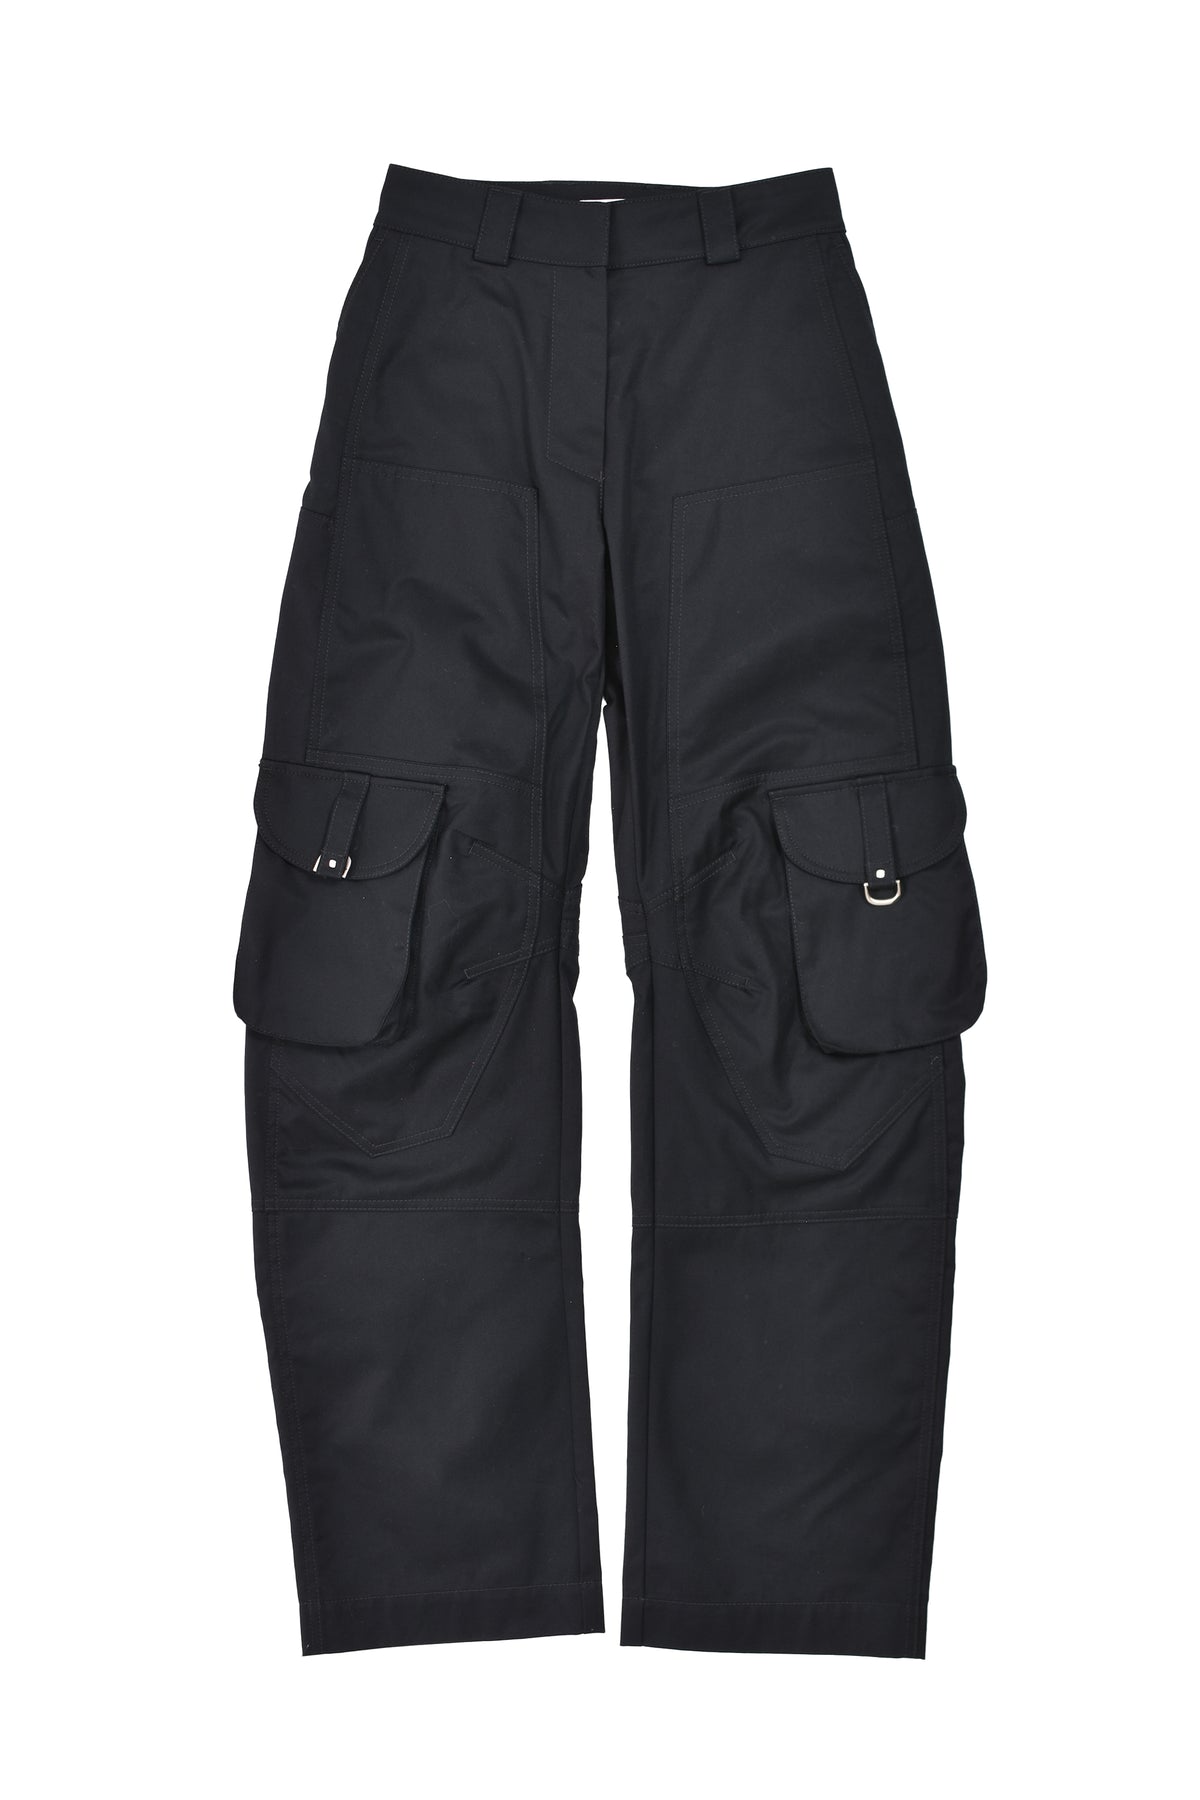 Off-White CO SIMPLE CARGO PKT OVER PANT / BLK